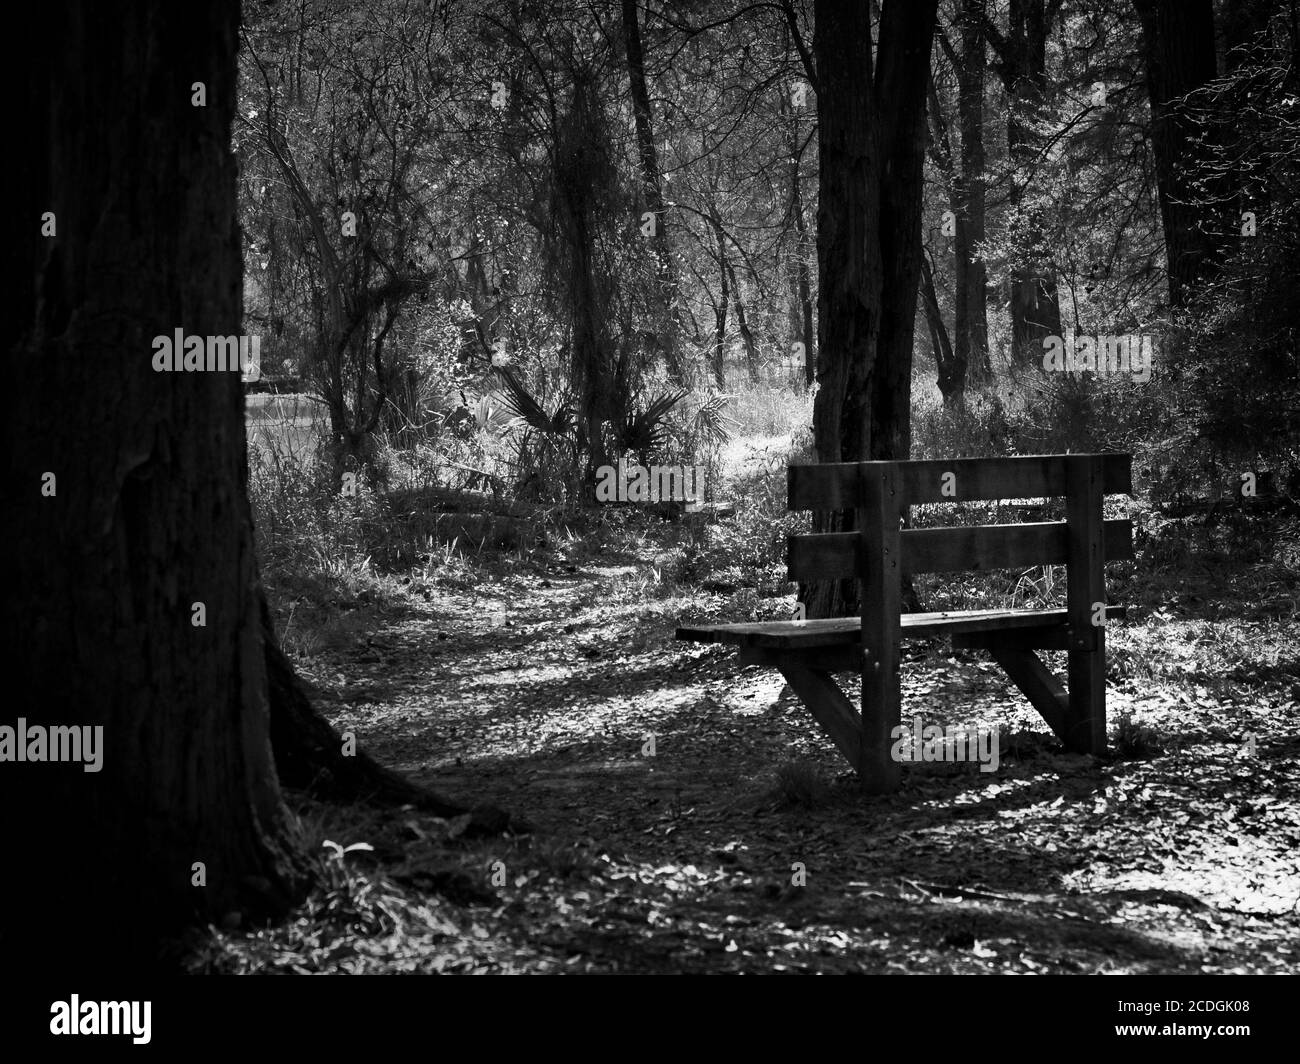 The Woodlands TX USA - 02-28-2020  -  Old Wooden Bench in Woods By Path in B&W Stock Photo